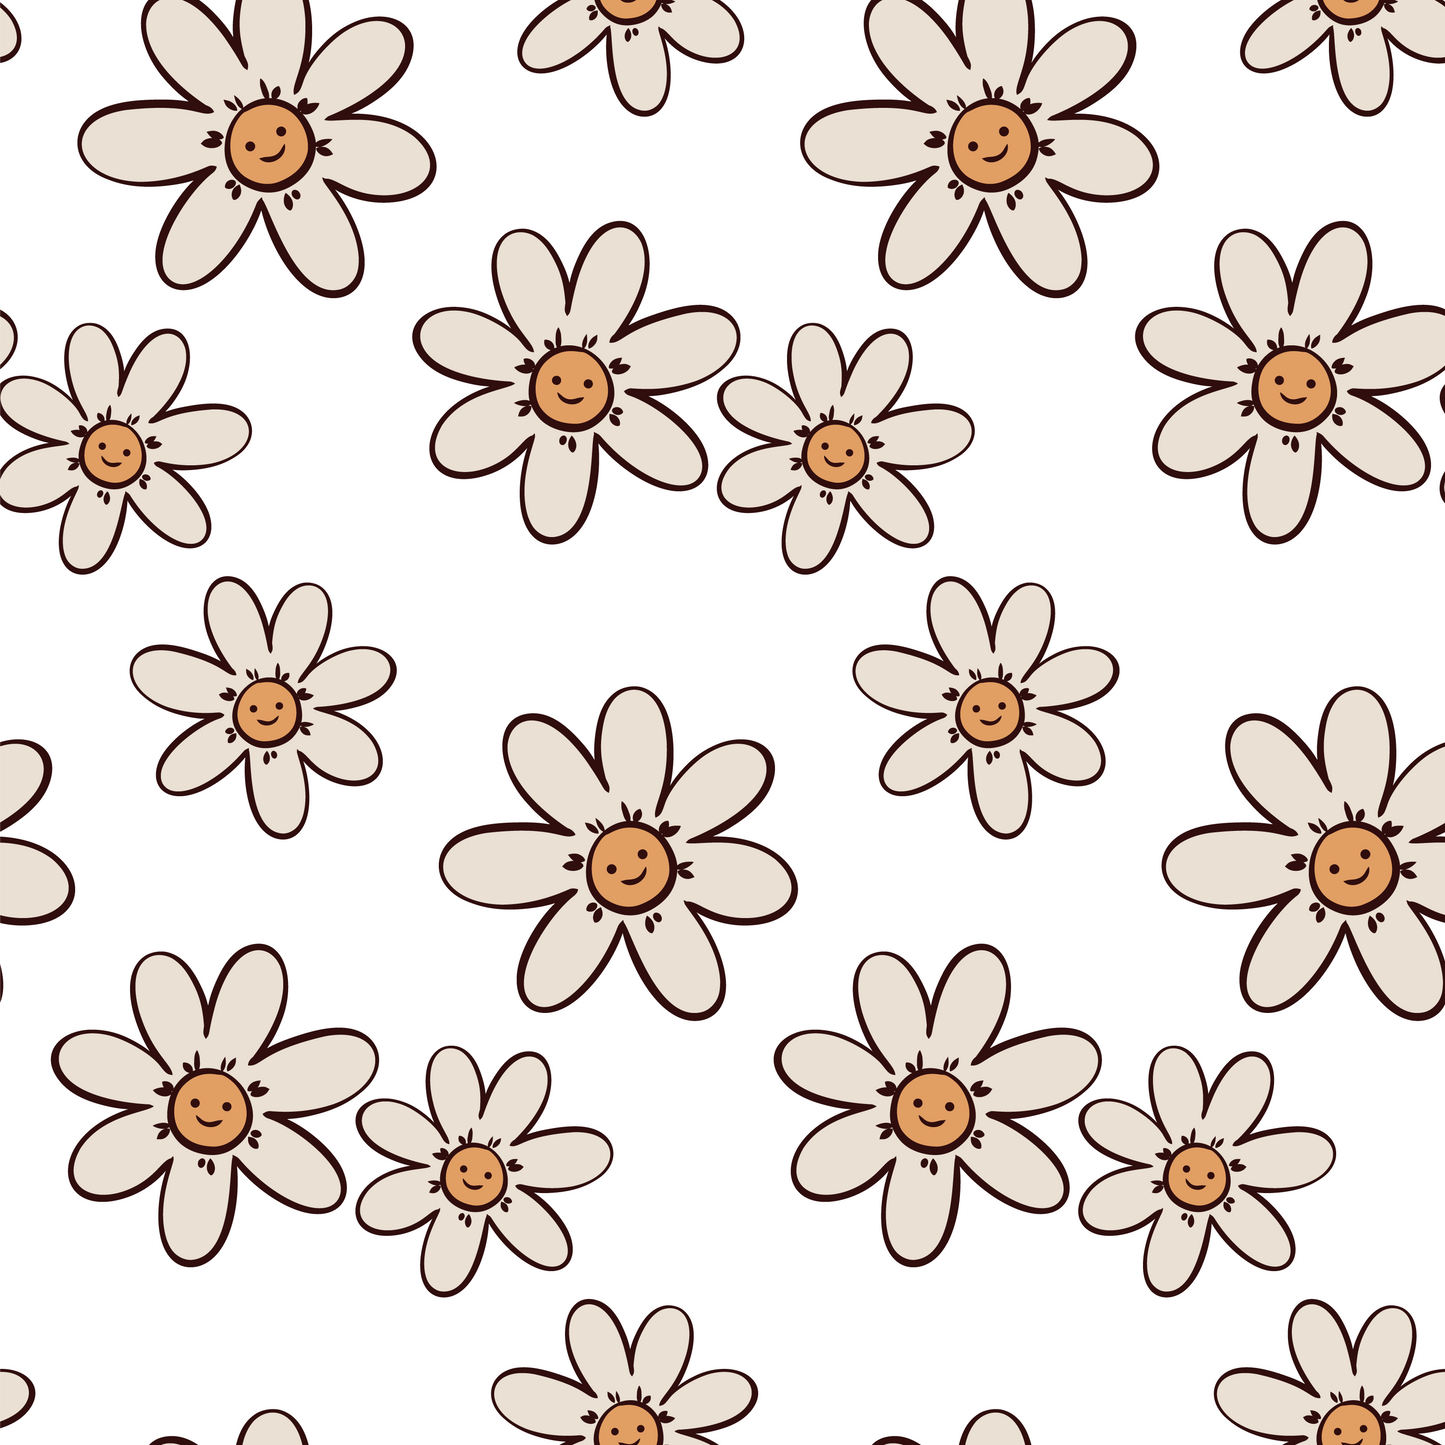 Smile Daisy (Faux Leather - 8" x 13" Printed Sheet)